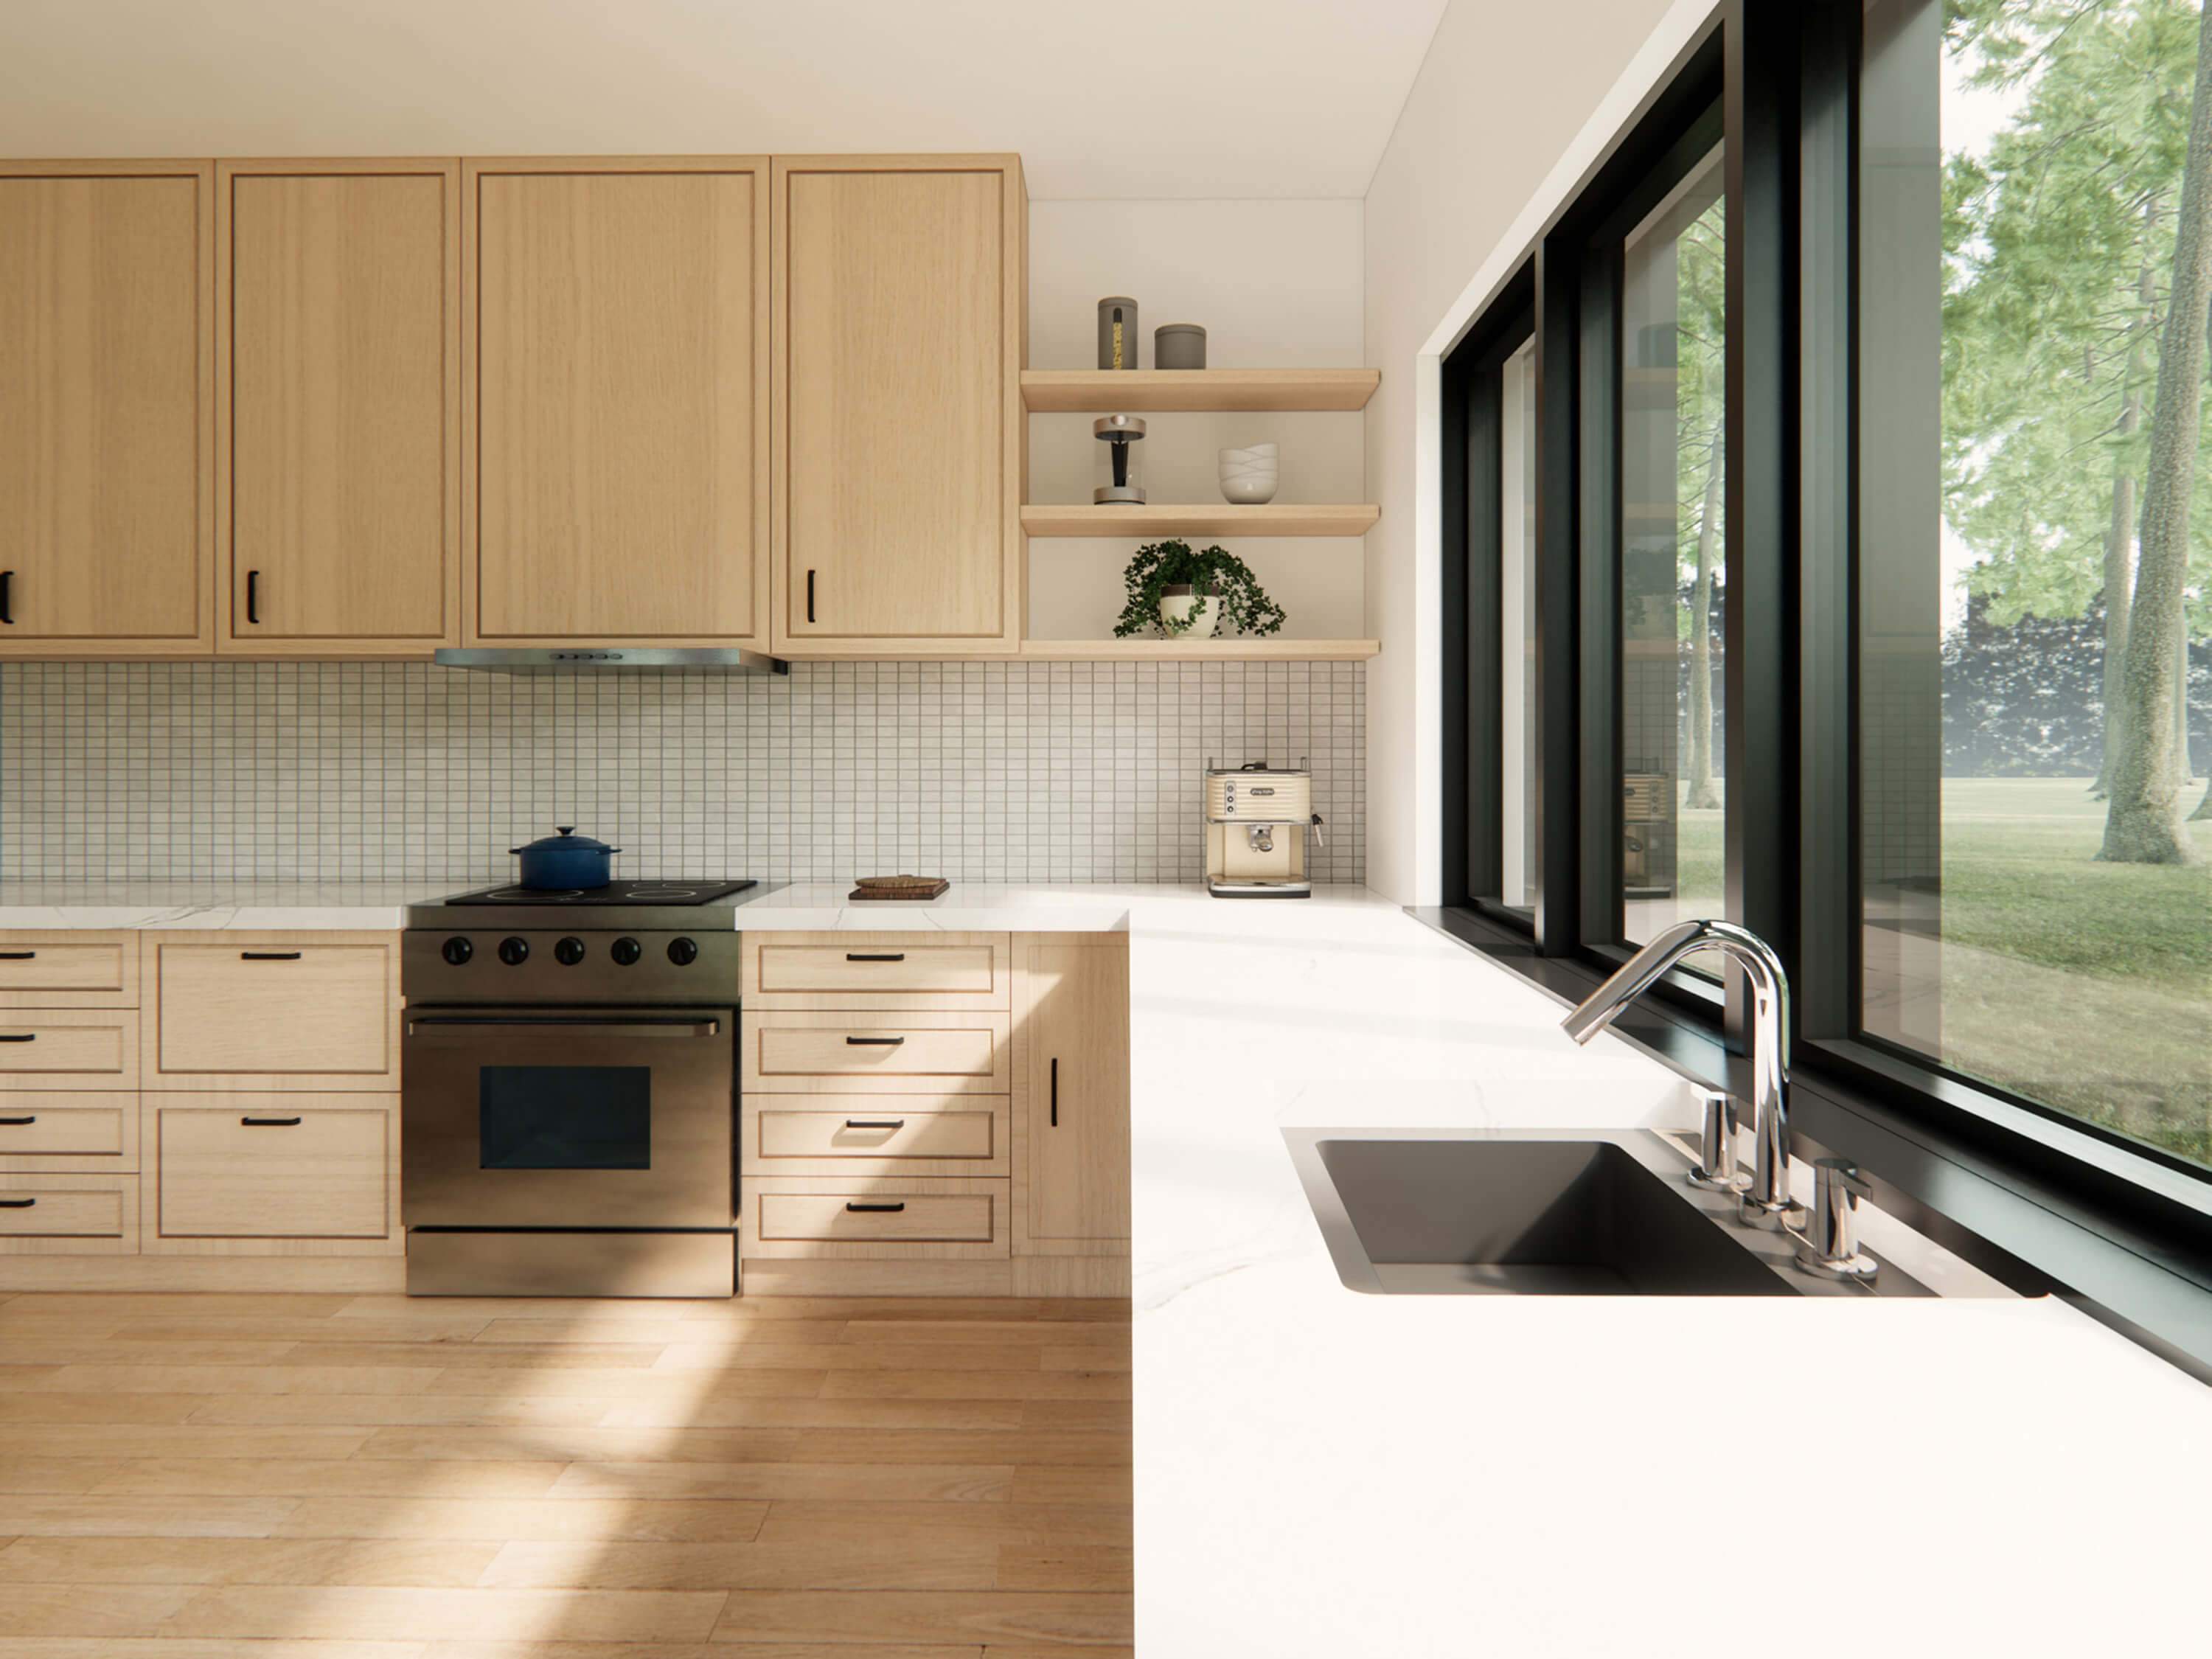 L-shape kicten with wooden cabinets, and large windows over the sinks